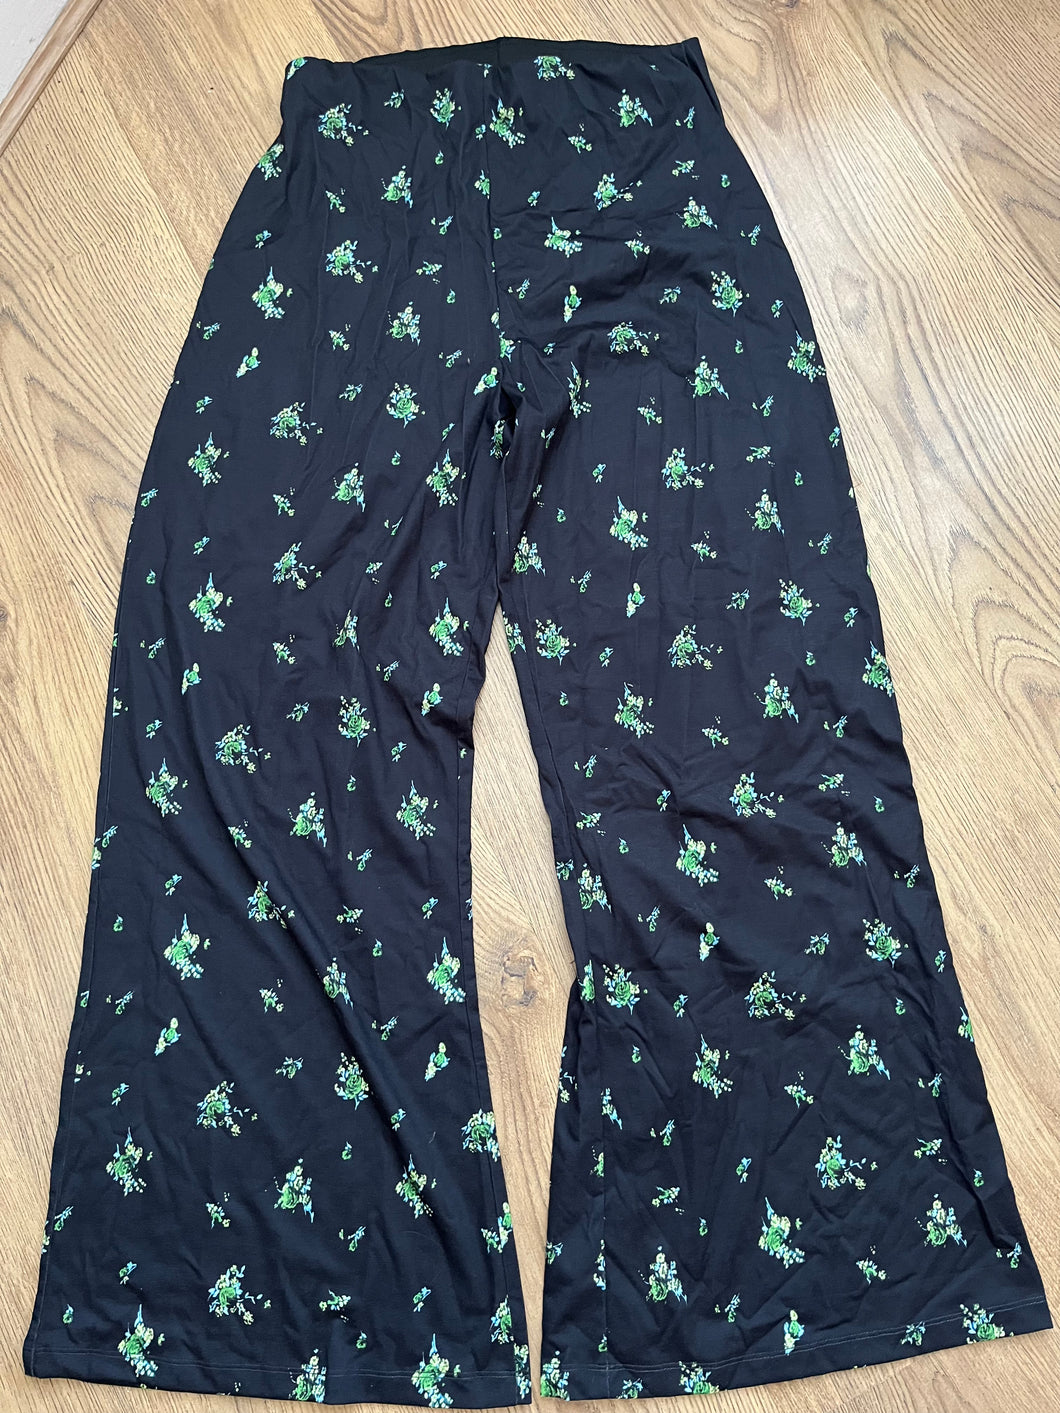 Ladies wide leg trousers - adults size 12